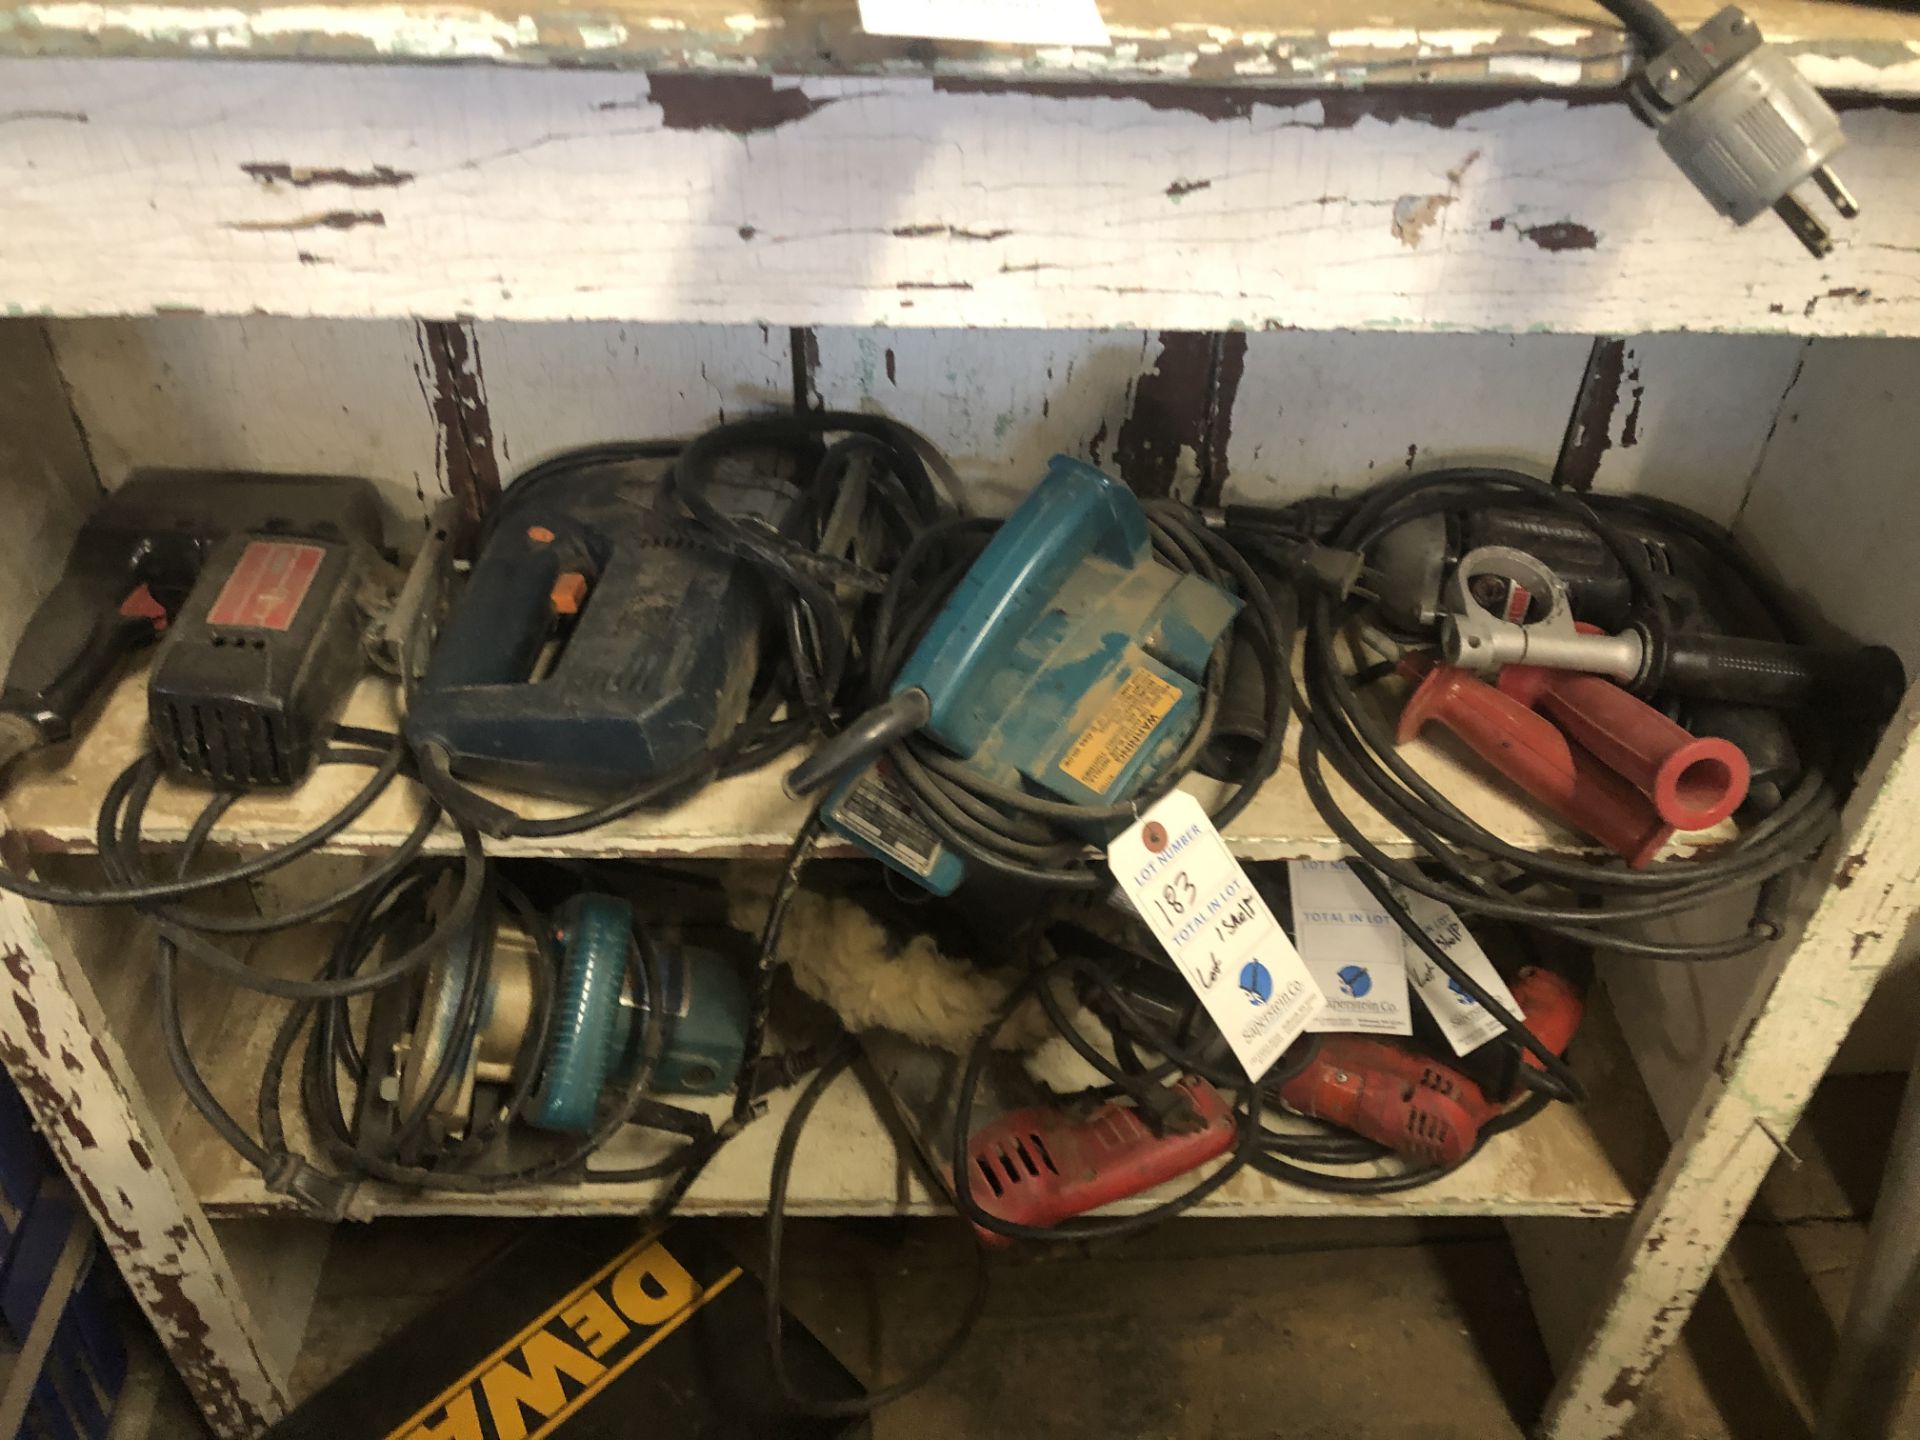 {LOT} On 1 Section of Shelving c/o: Drill, Cable Power Drill, Sander, Jig Saws,